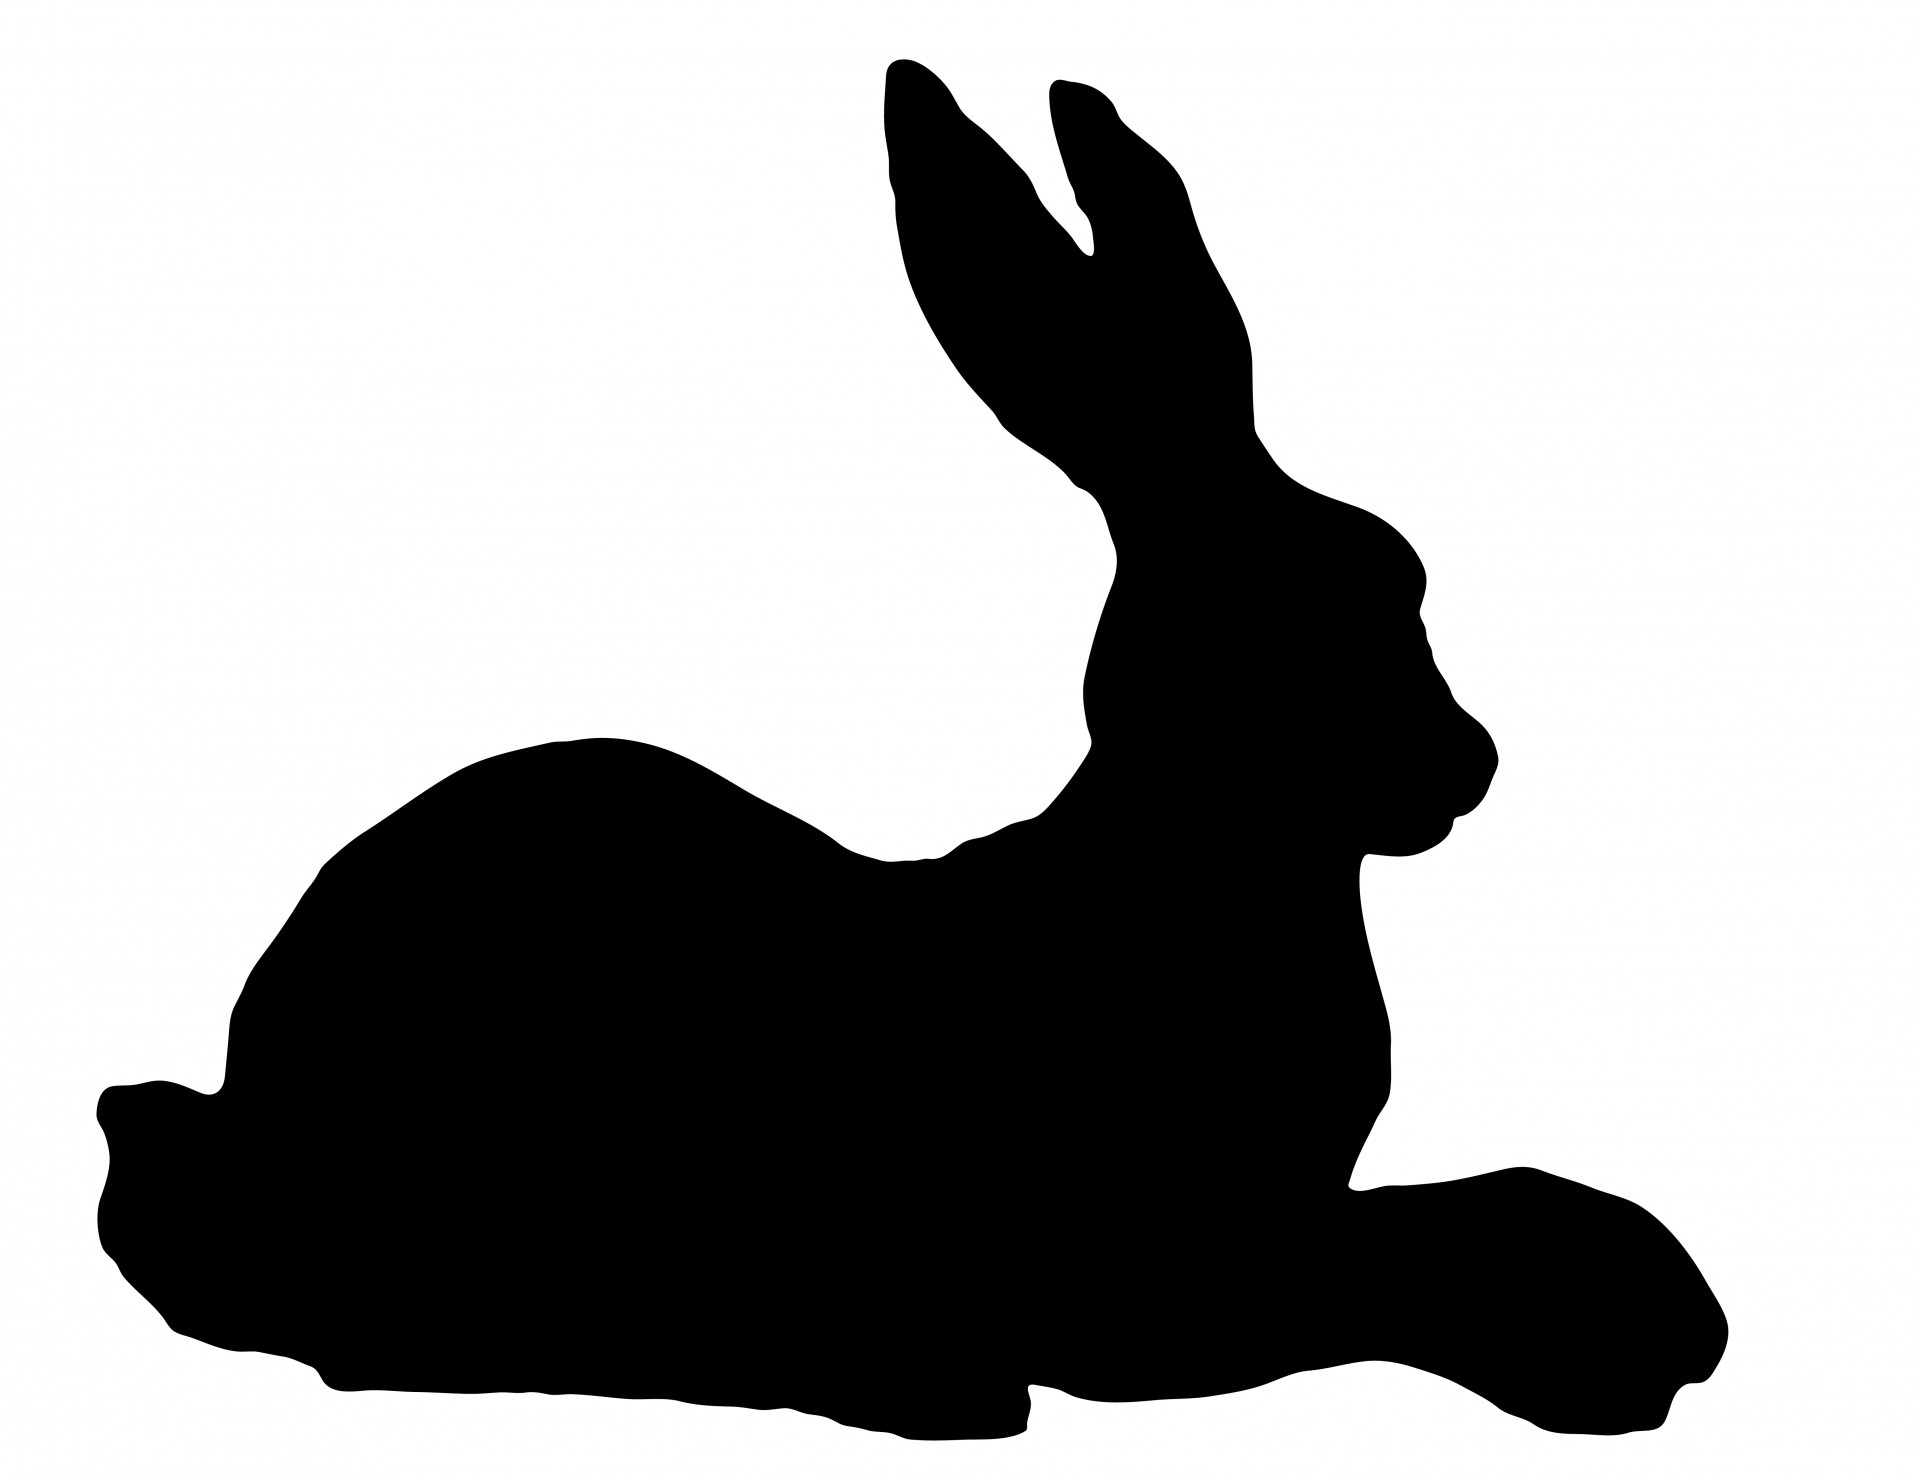 Black silhouette of a rabbit or hare laying down clipart